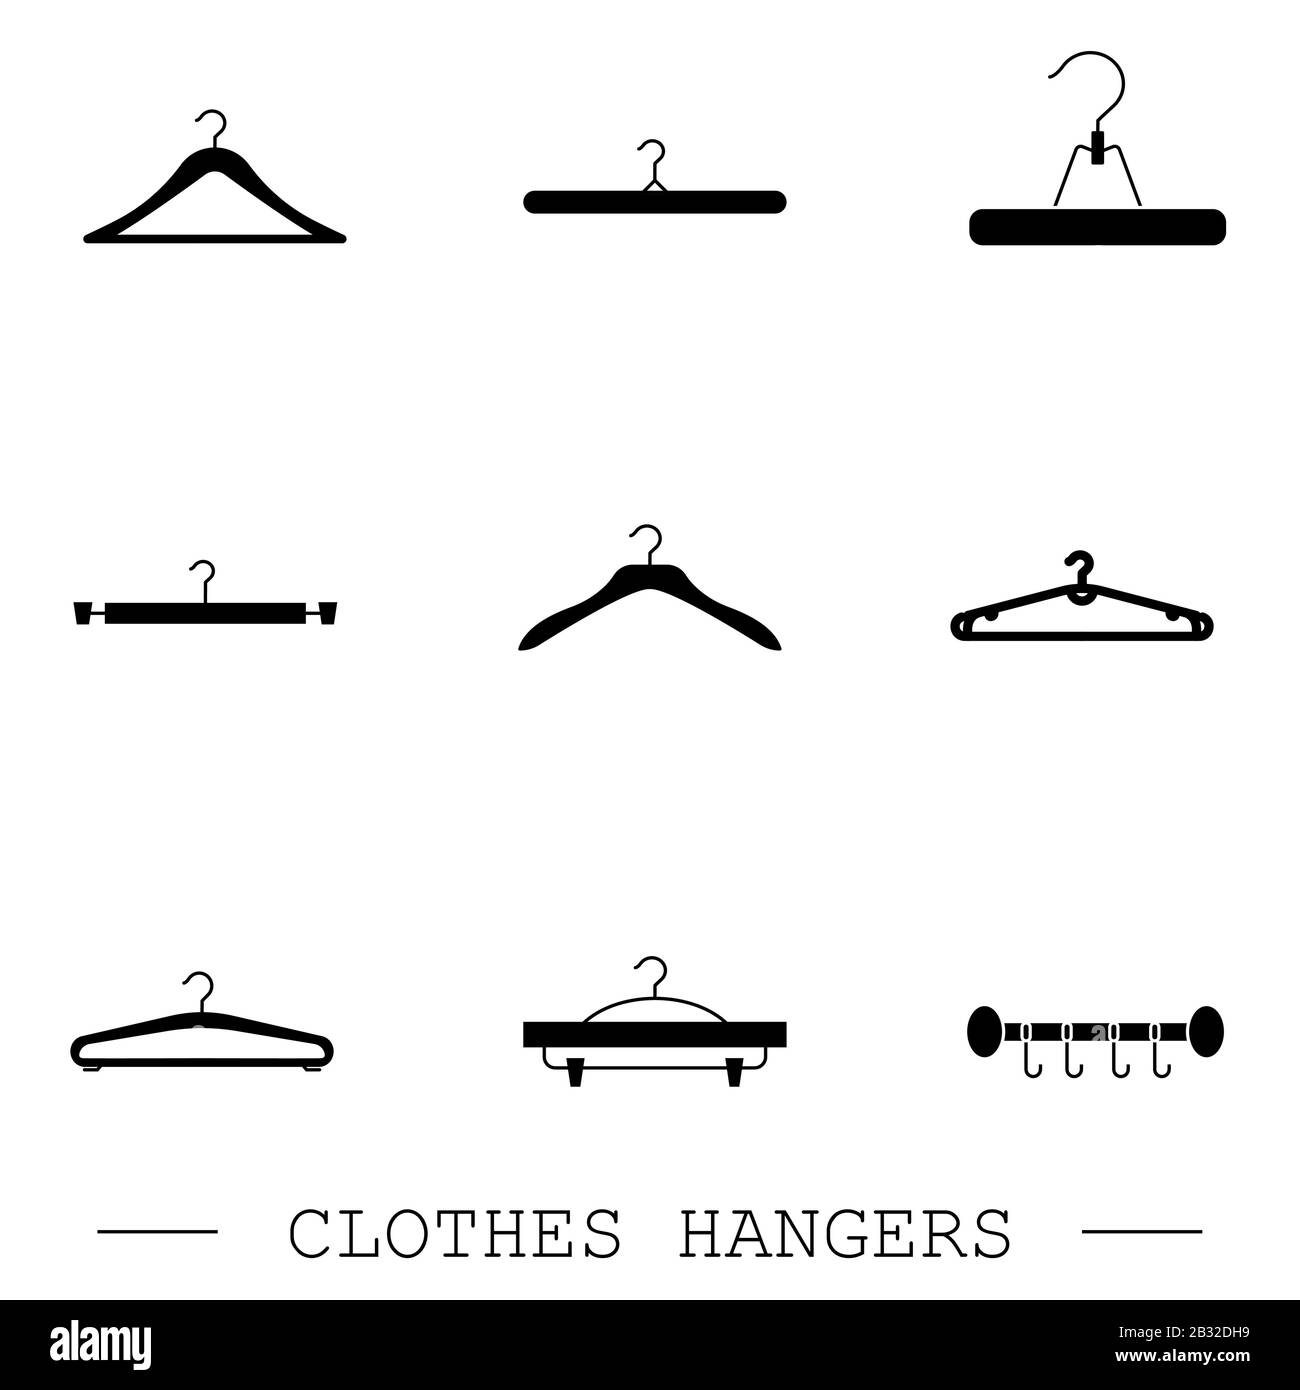 Hangers vector black icons set. Set of vector illustration hanger for clothing and fashion. clothes hangers icon set Stock Vector